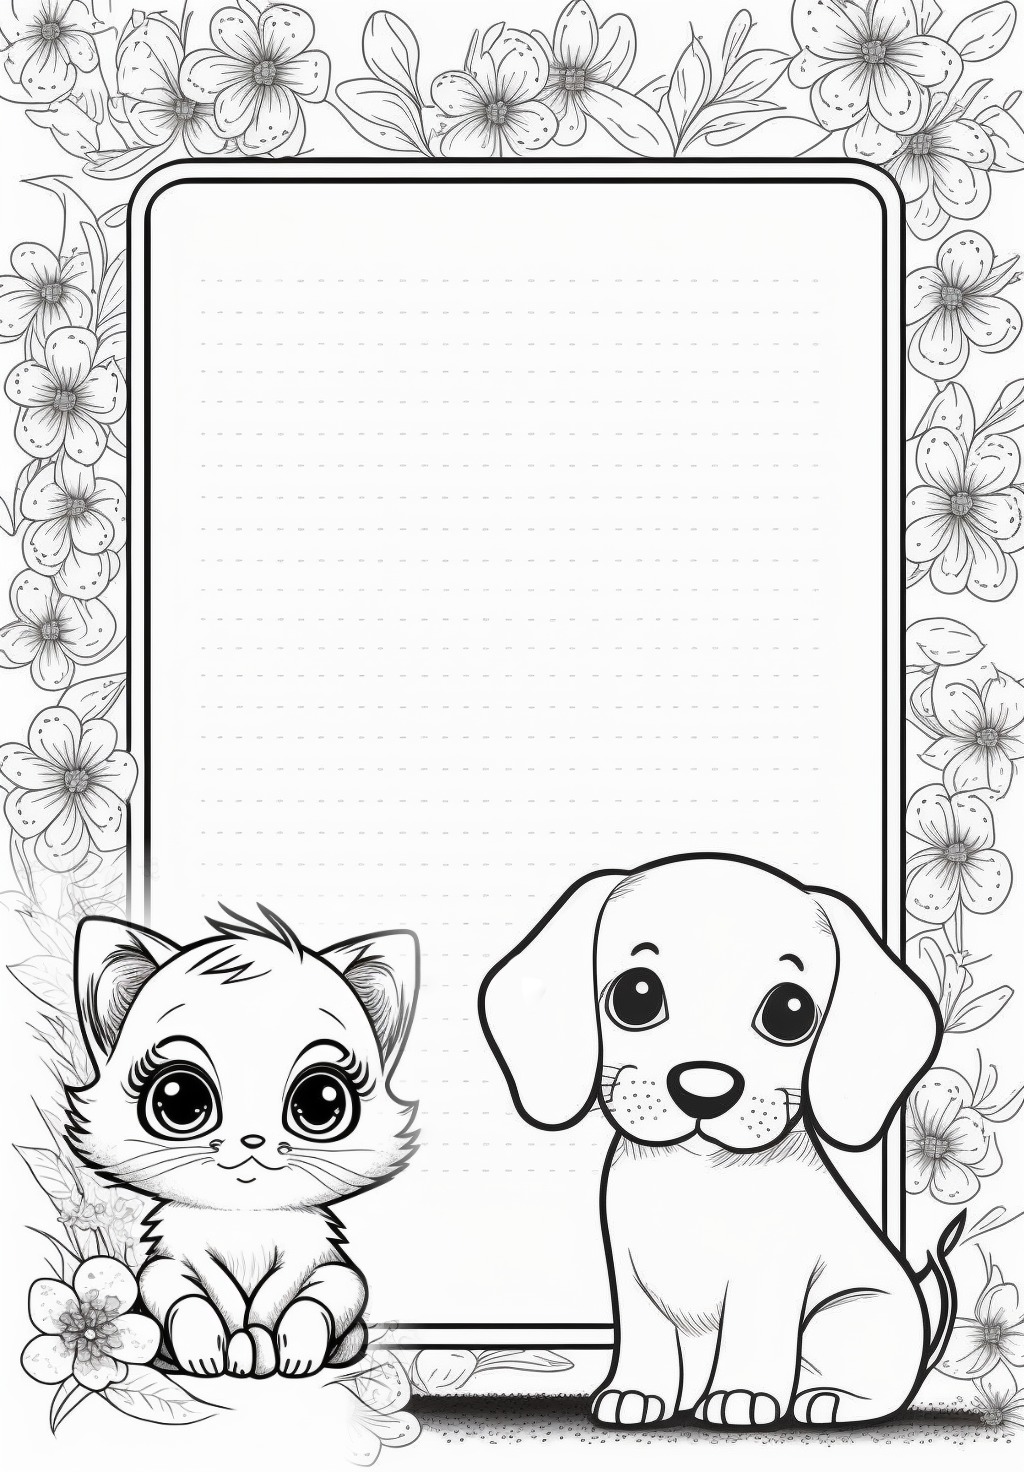 img1681759393 this week we have 8 coloring templates as stationery for you.jpeg